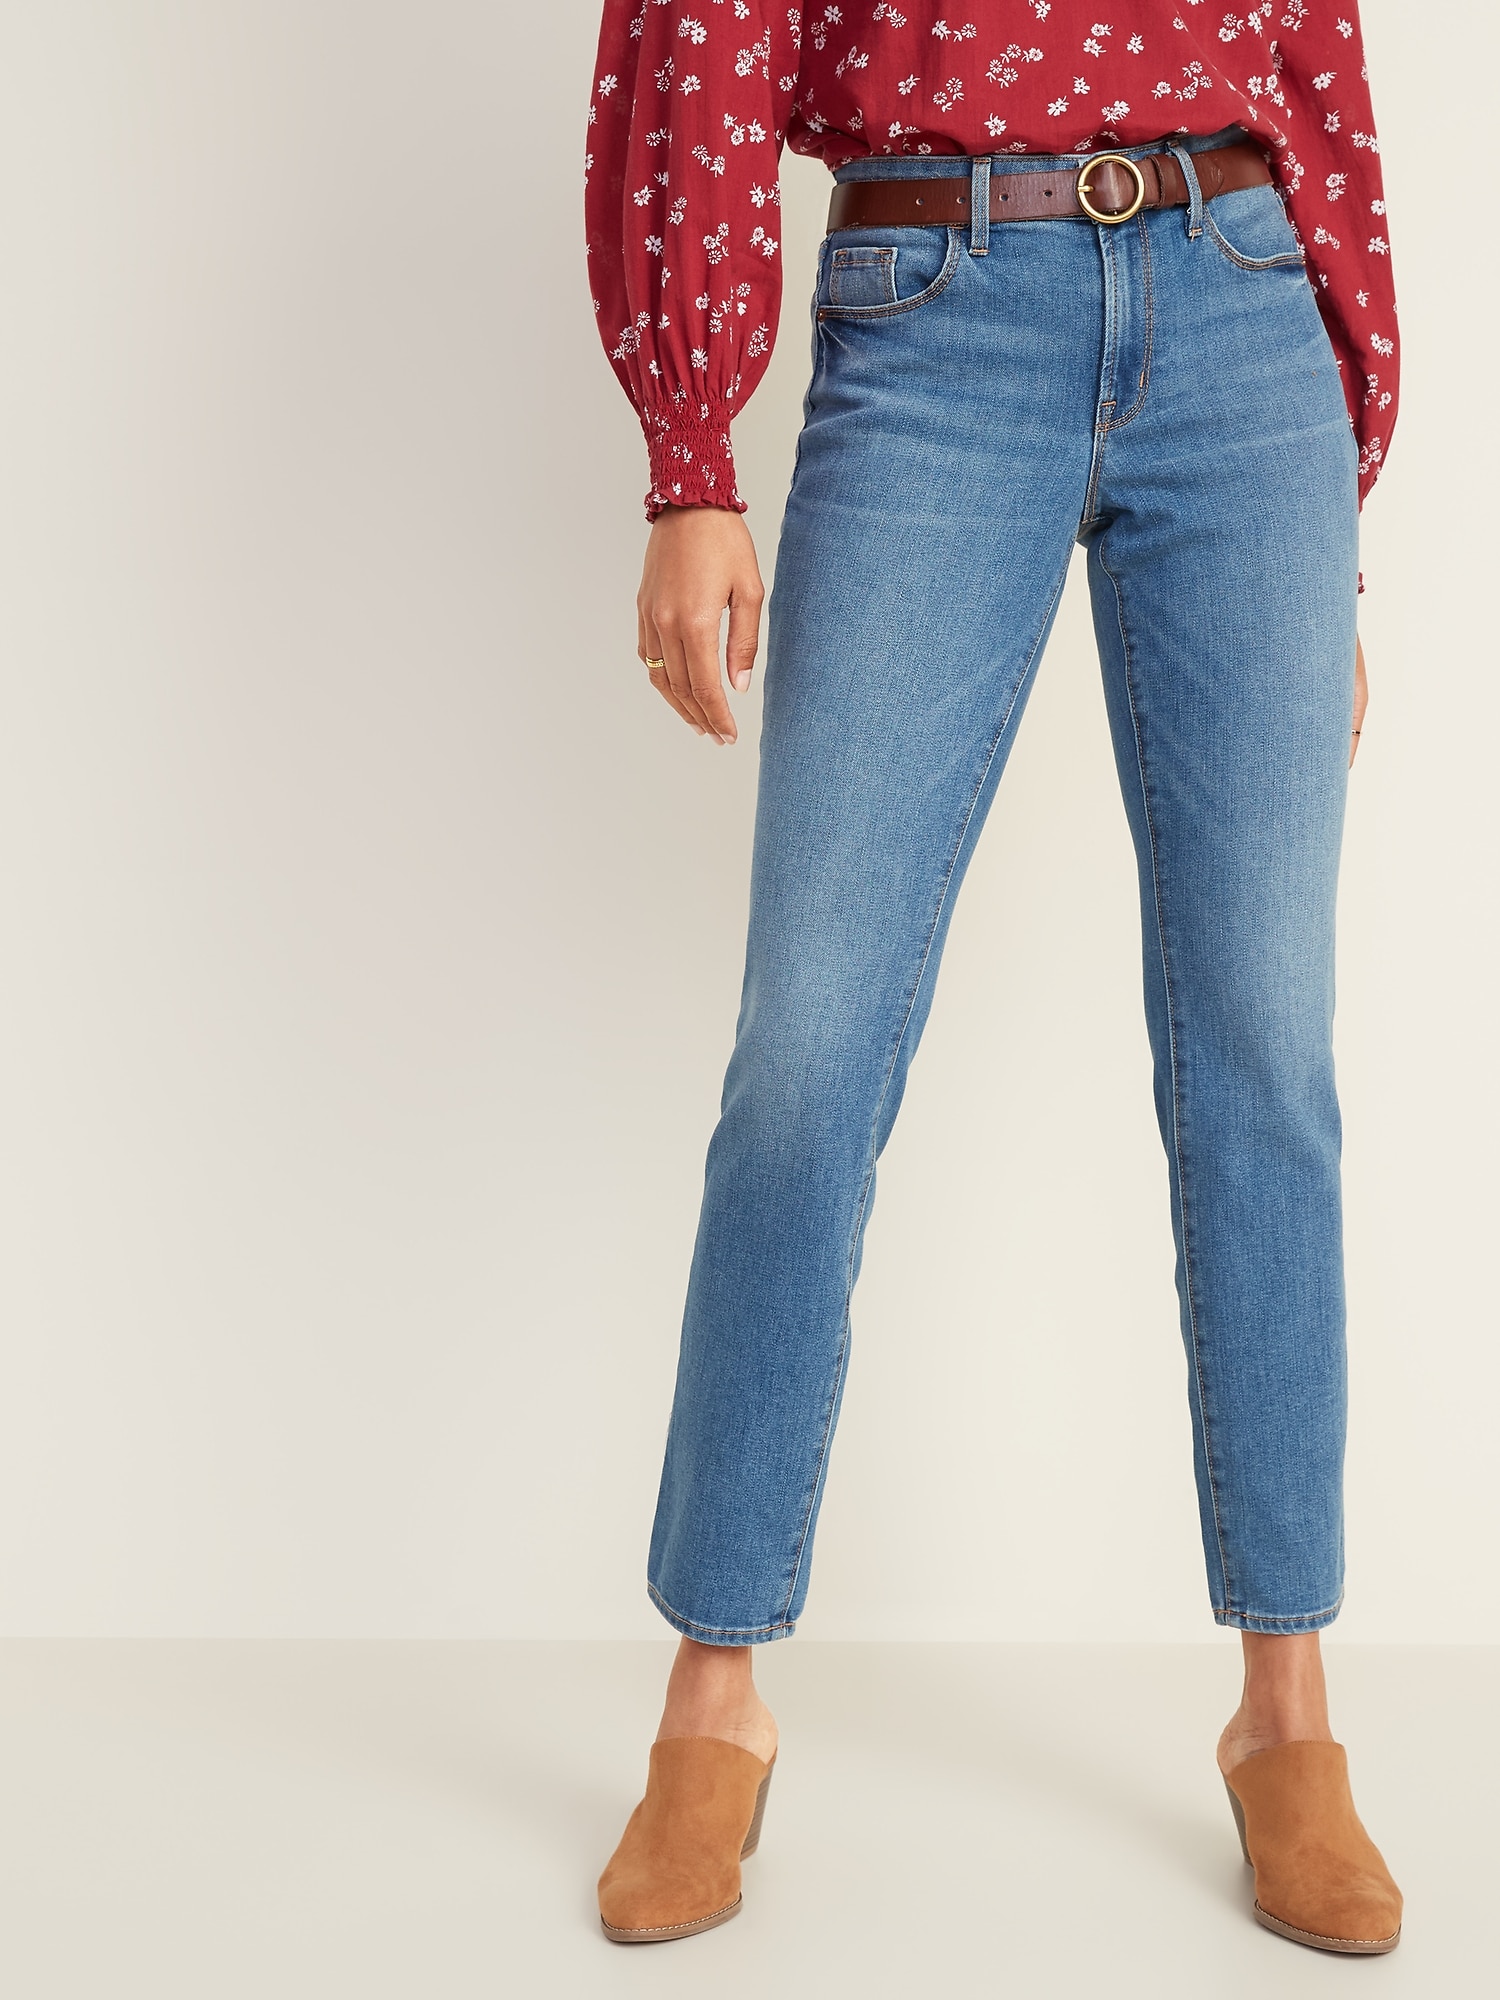 MidRise Power Slim Straight Jeans for Women Old Navy